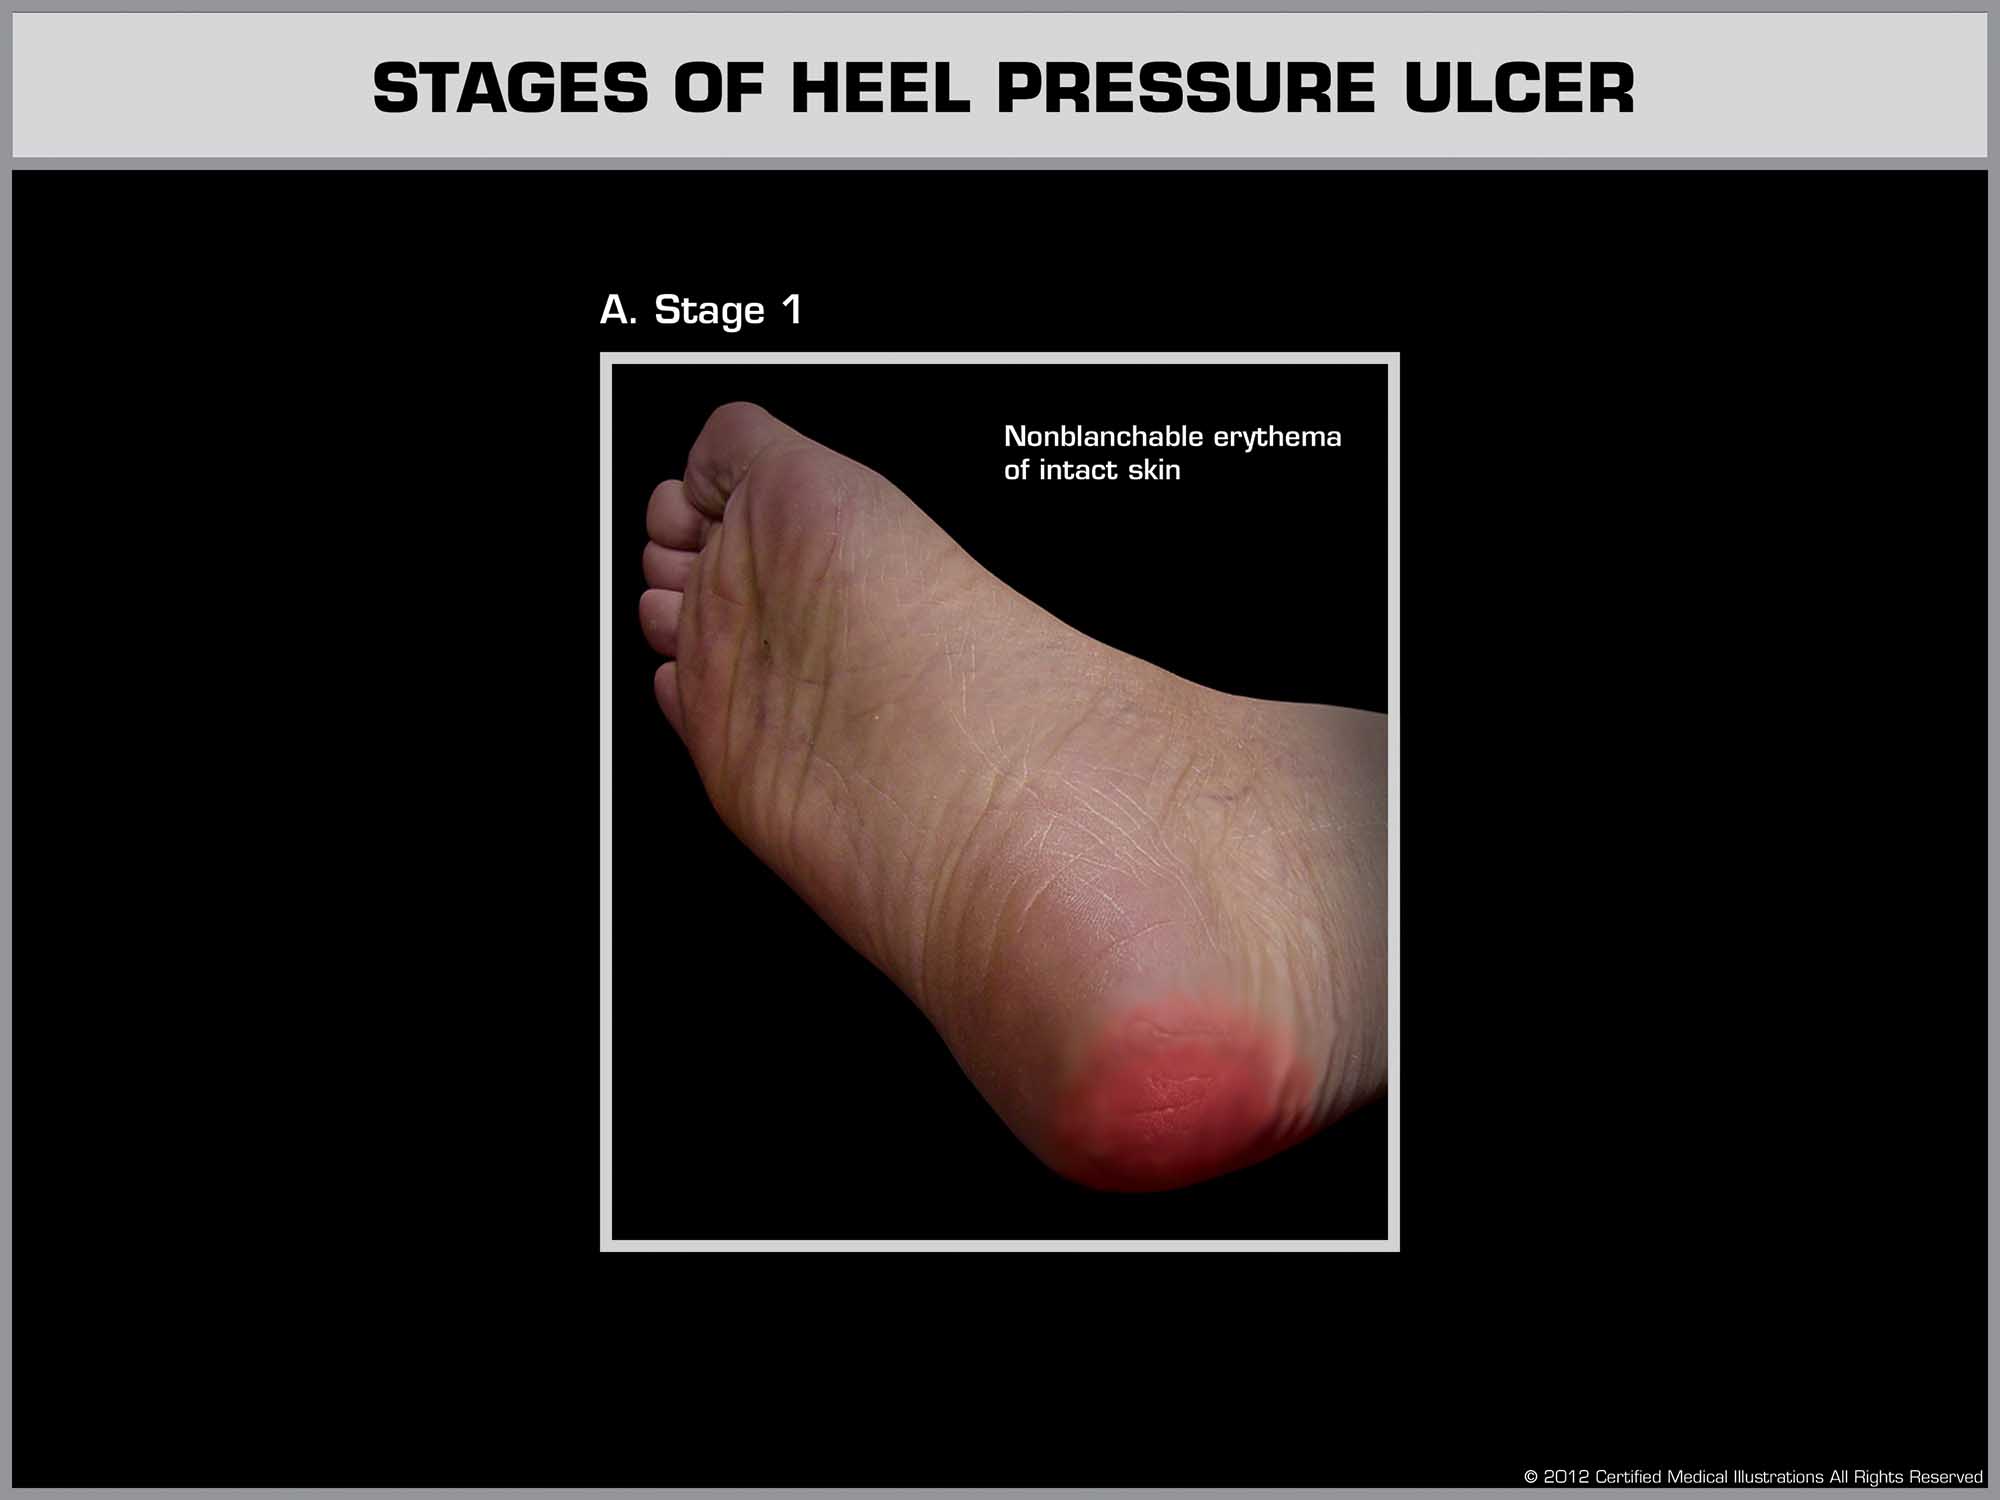 Stages of Heel Pressure Ulcer - Stage 1